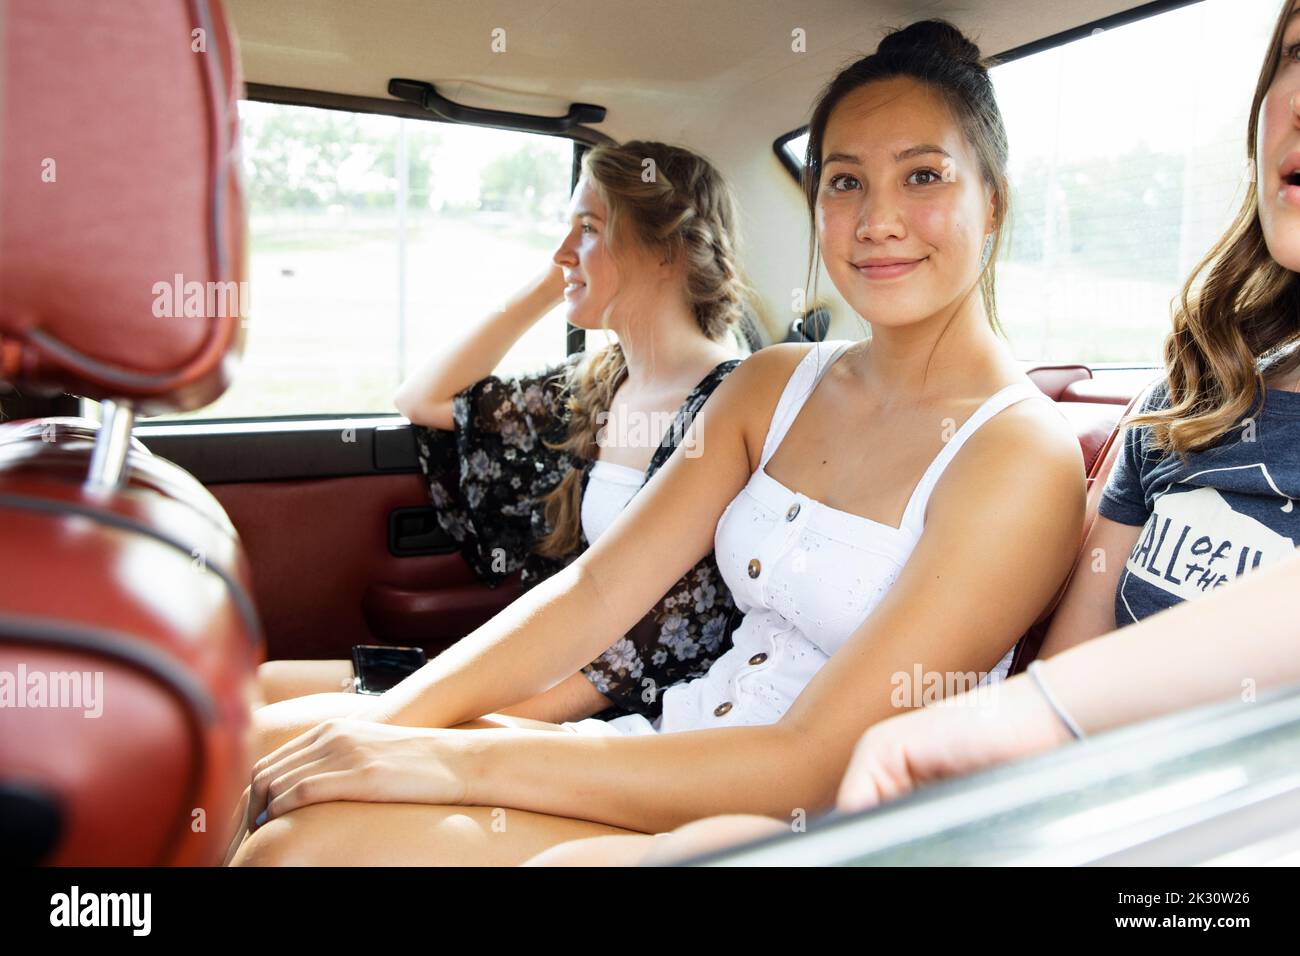 Portrait happy teenage girl riding in back seat of car with friends Stock Photo